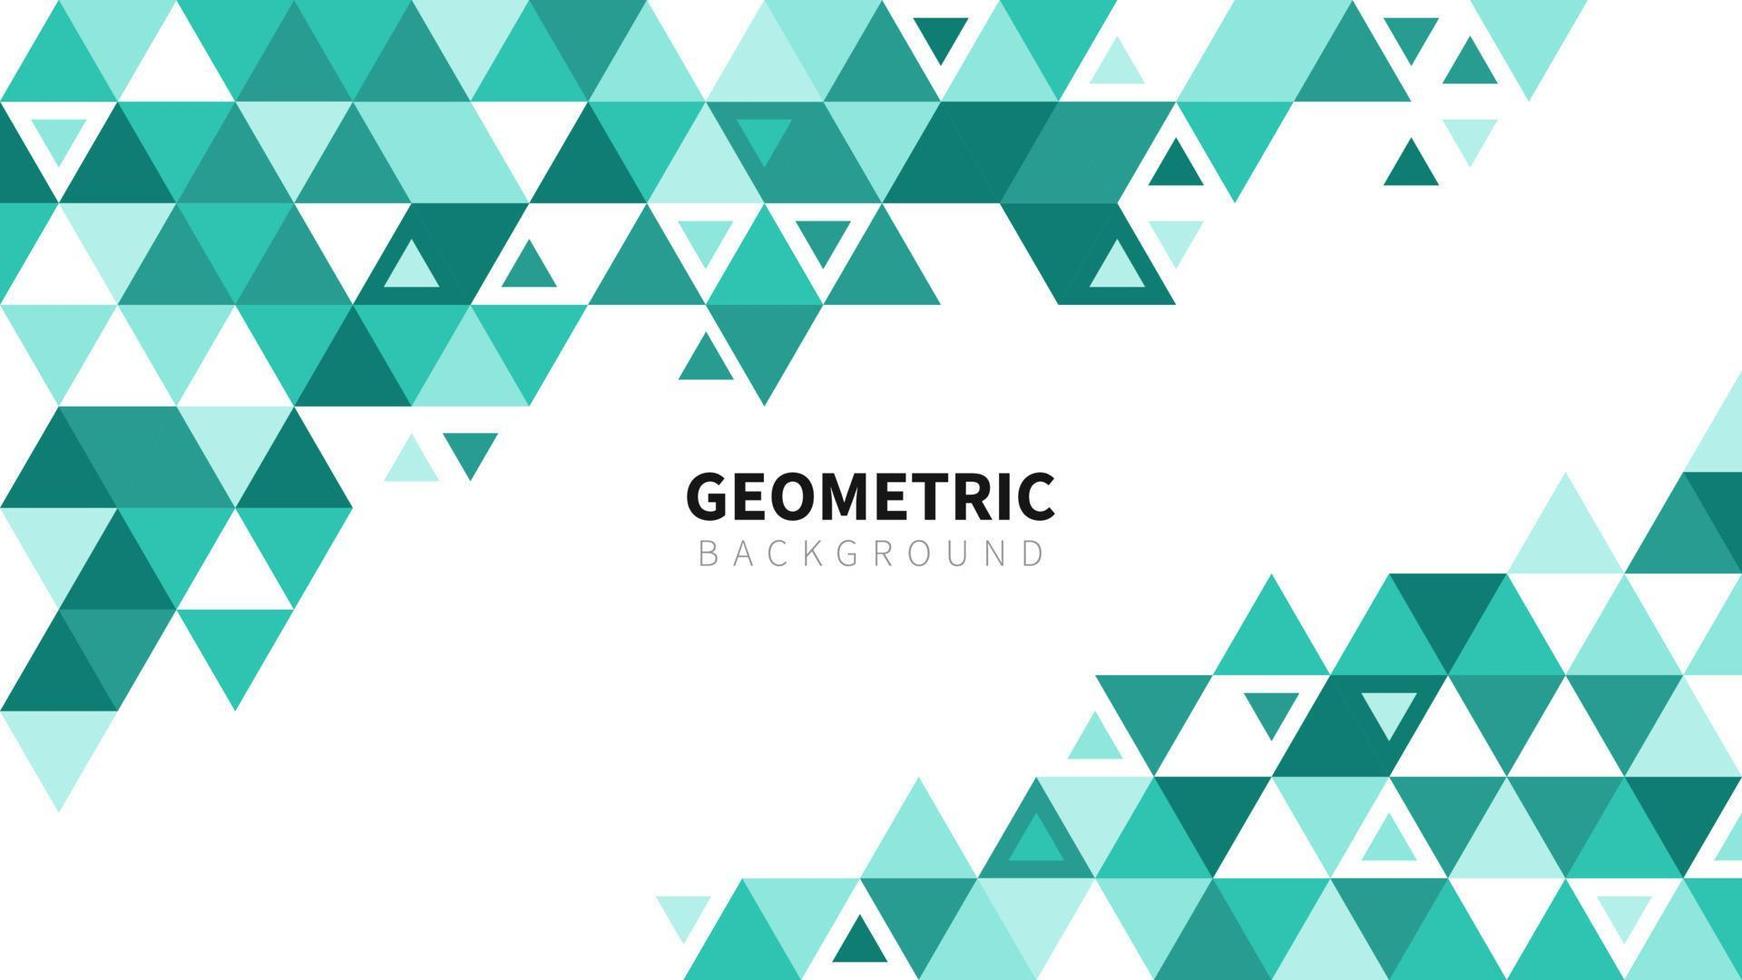 Template with a colorful green gradient triangular pattern on each corner position with a space. Modern monochrome geometric background for business or corporate presentation. Vector illustration